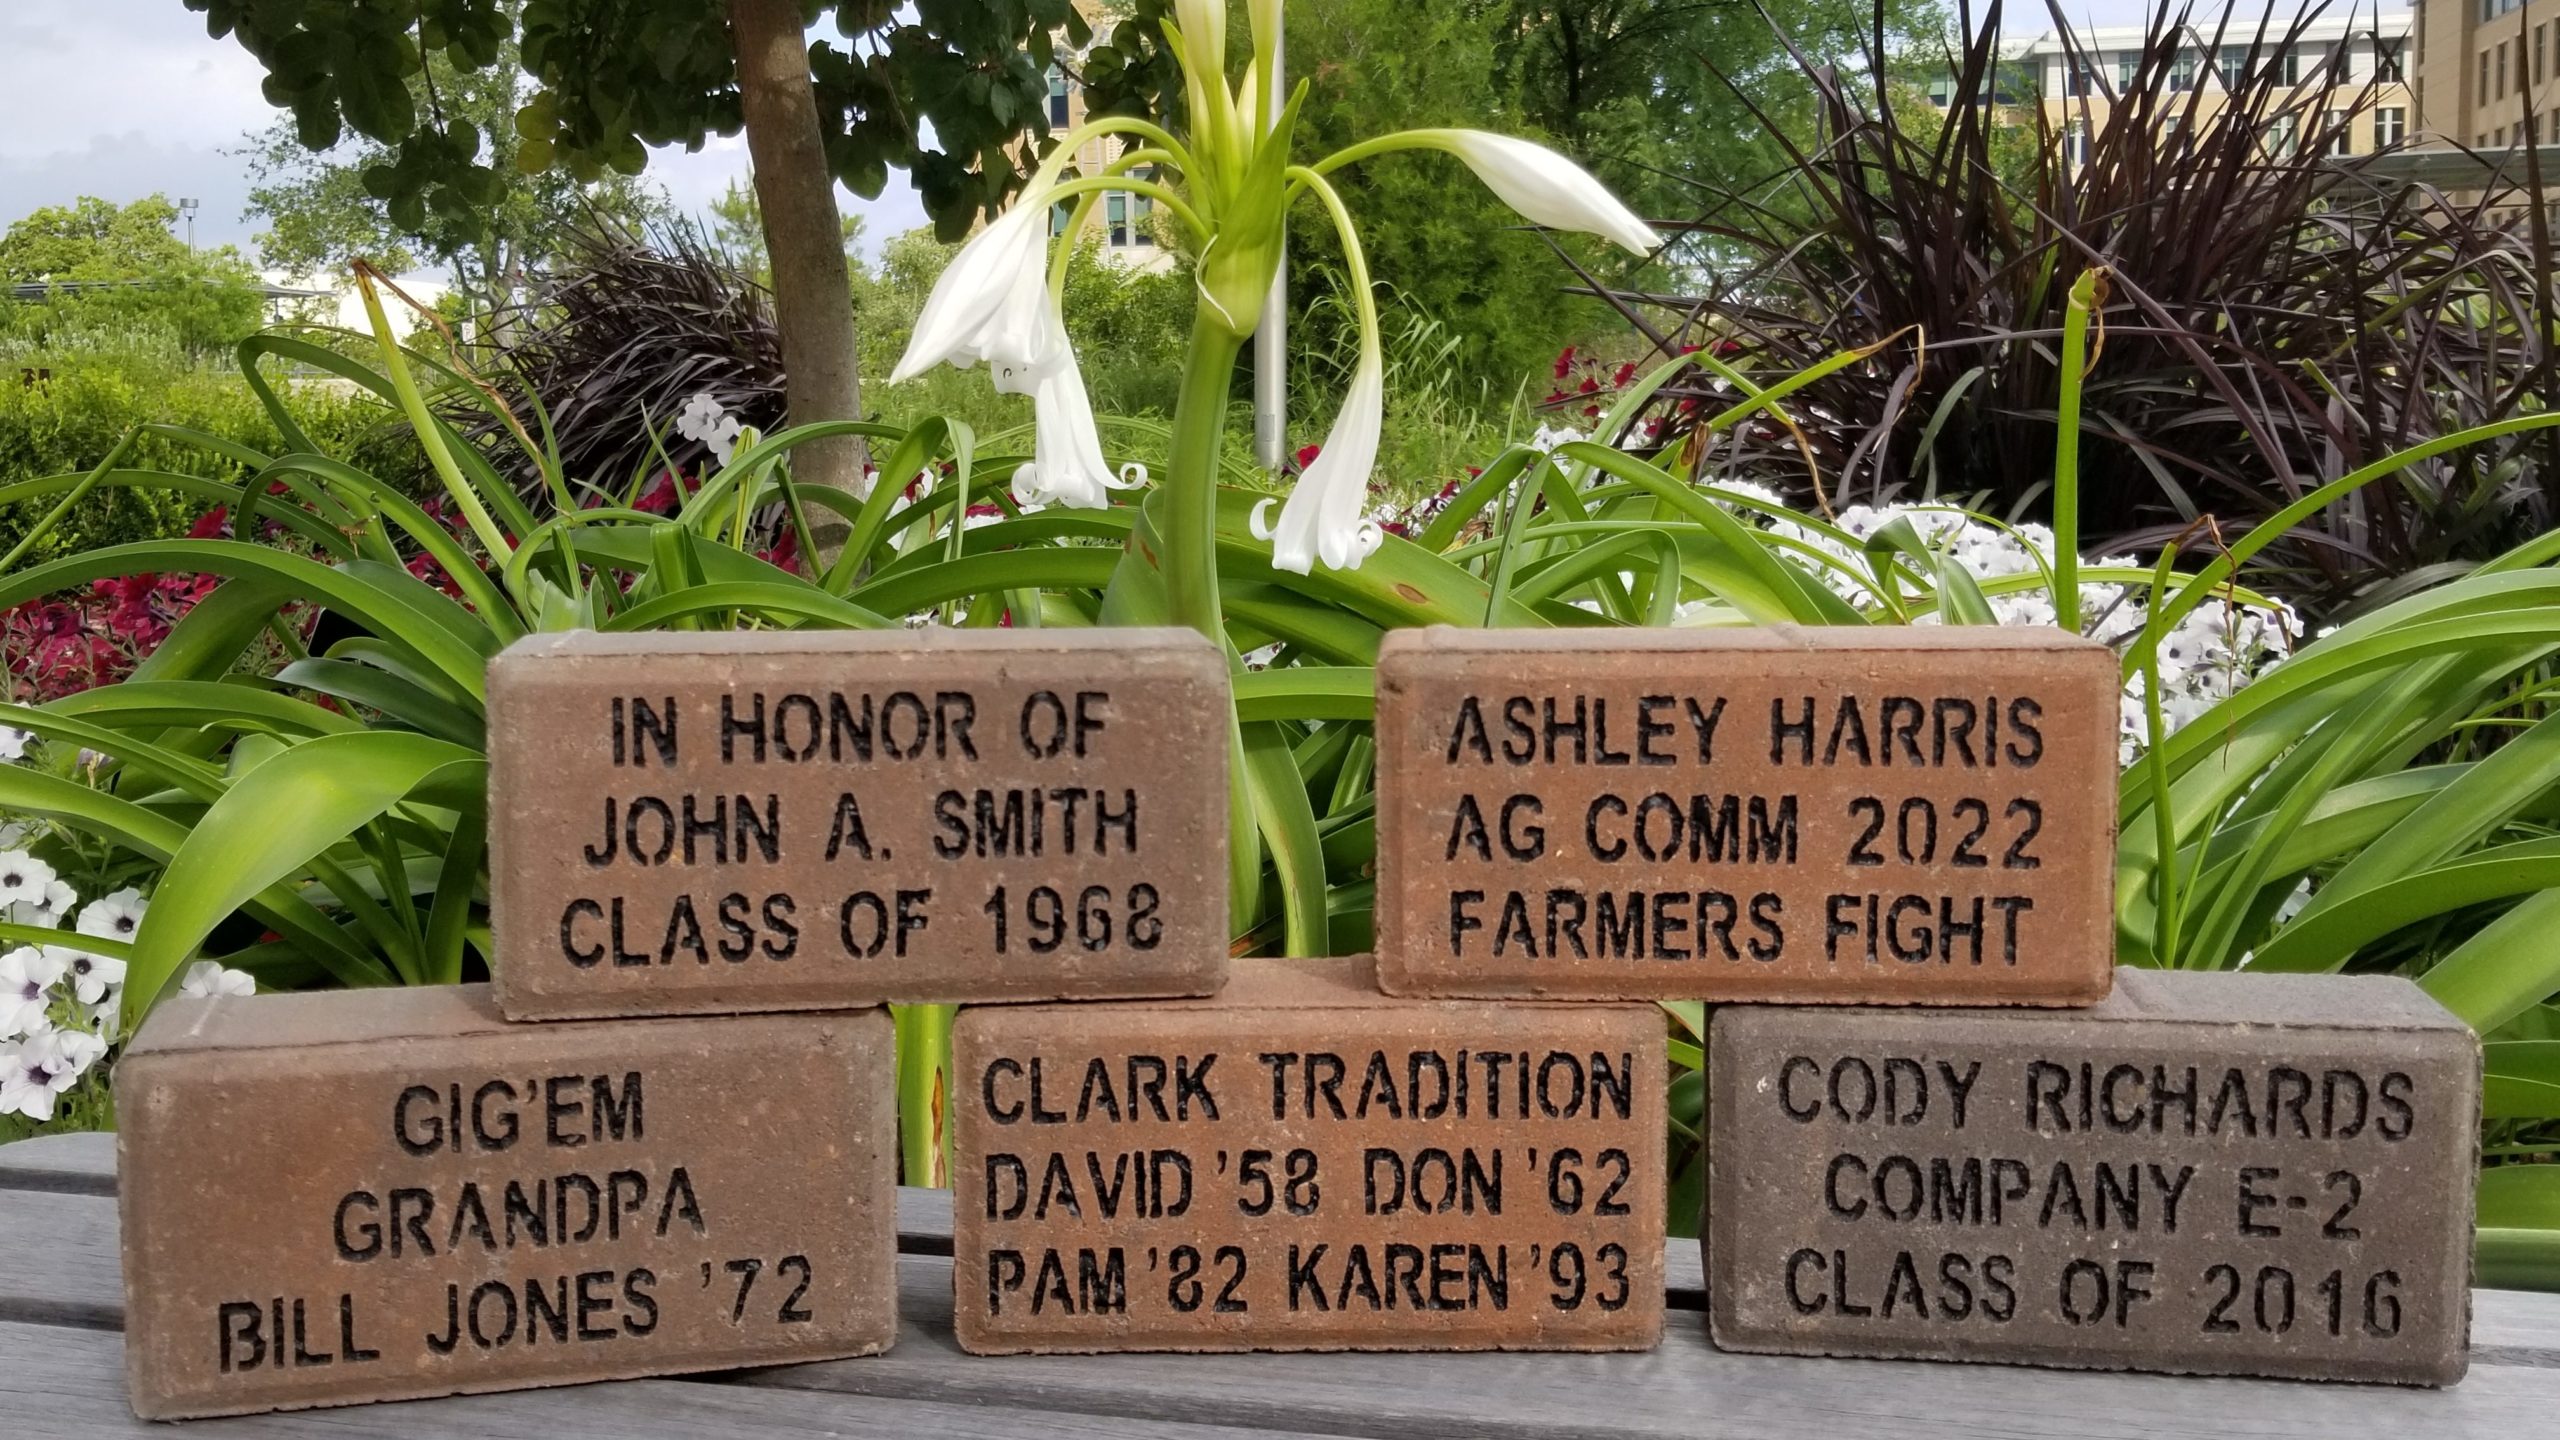 Five bricks stacked on top of each other with "In Honor of John A. Smith, Class of 1968; Ashley Harris, Ag Comm 2022, Farmers Fight; Gig'Em, Grandpa, Bill Jones '72; Clark Tradition, David '58, Don '62, Pam '82, Karen '93; and Cody Richards Company E-2, Class of 2016" engraved.